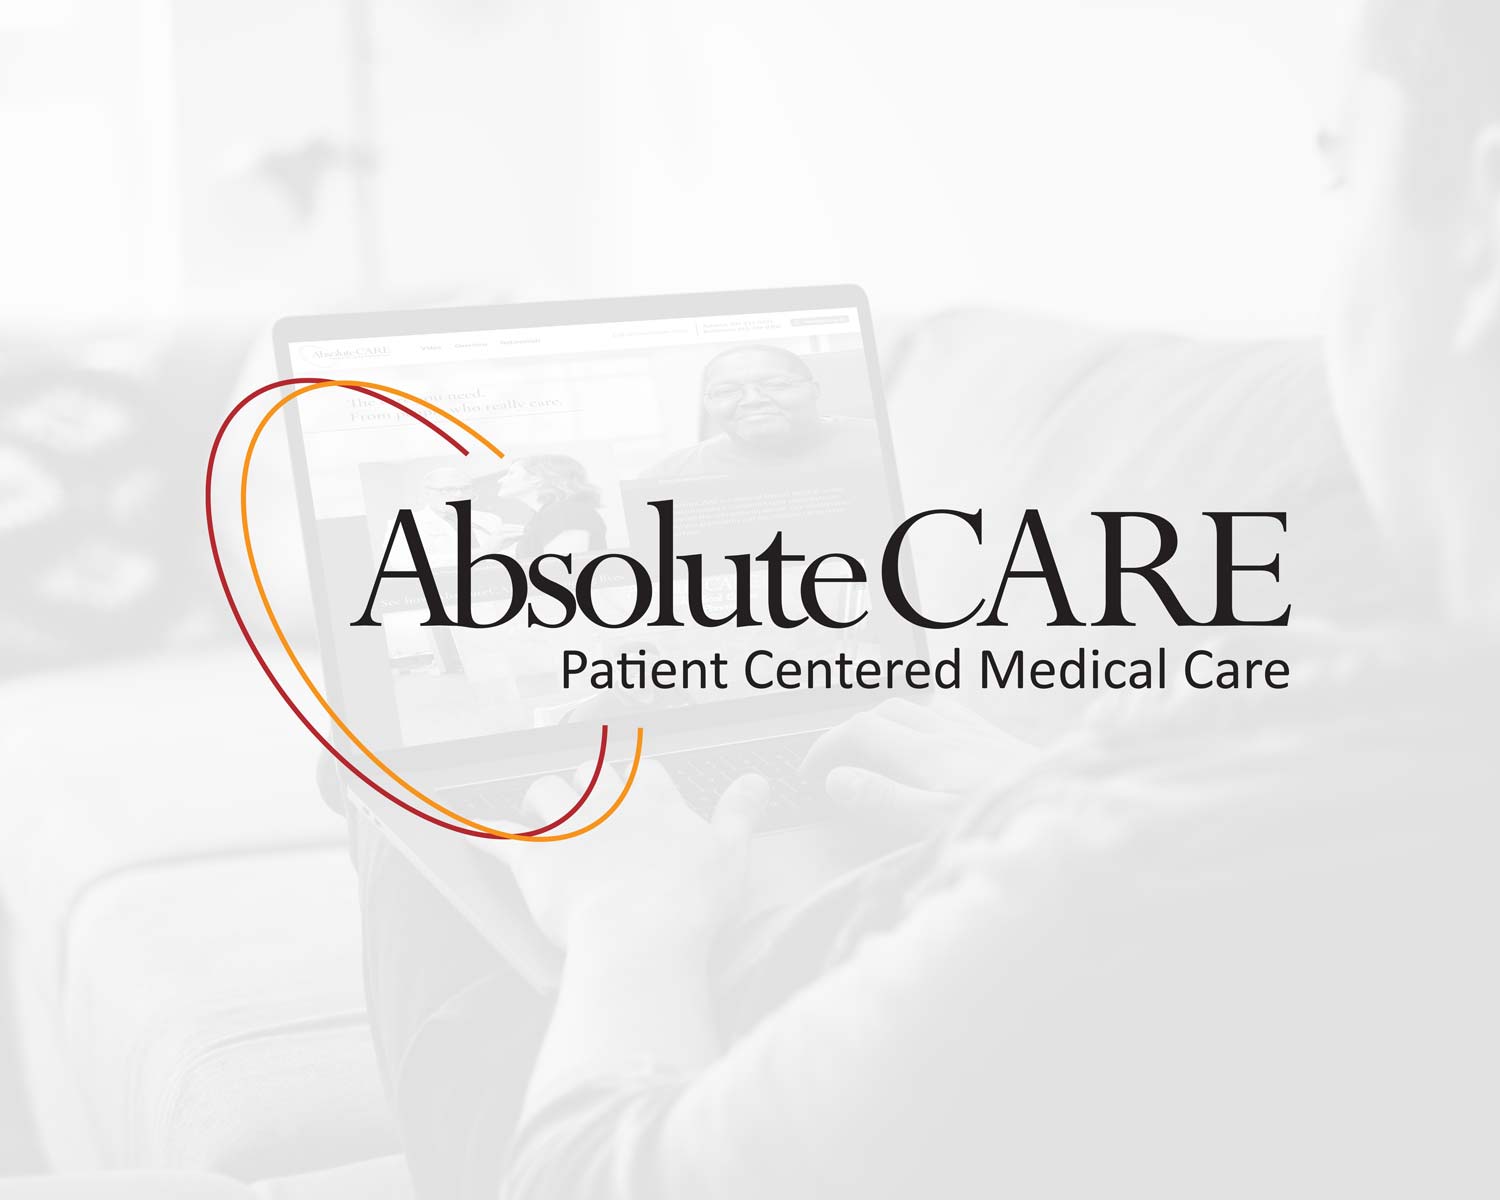 GKV Named Agency of Record for AbsoluteCARE - GKV